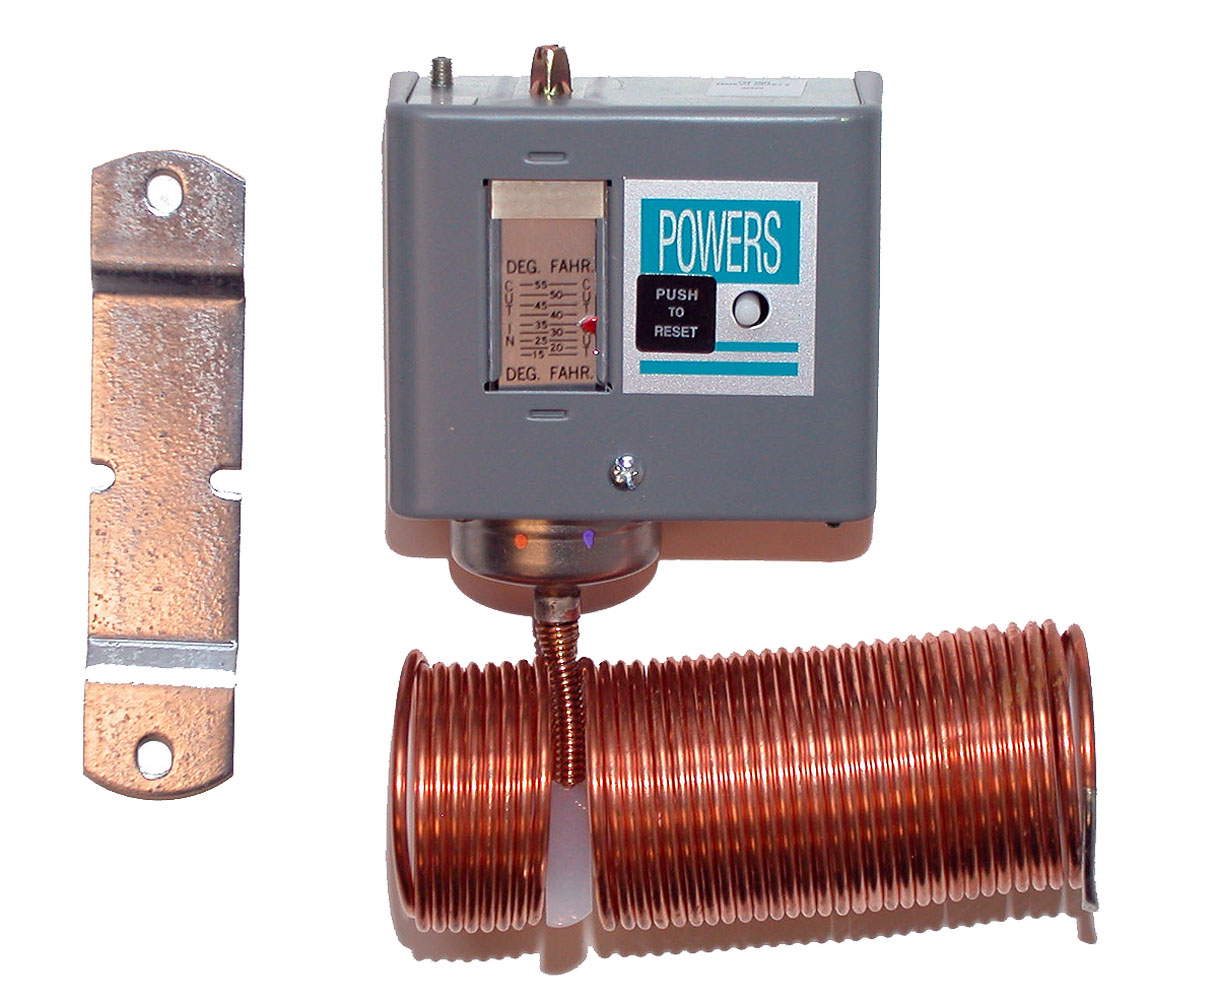 Thermostats for high performance building operation & management - HVAC  Products - Siemens USA